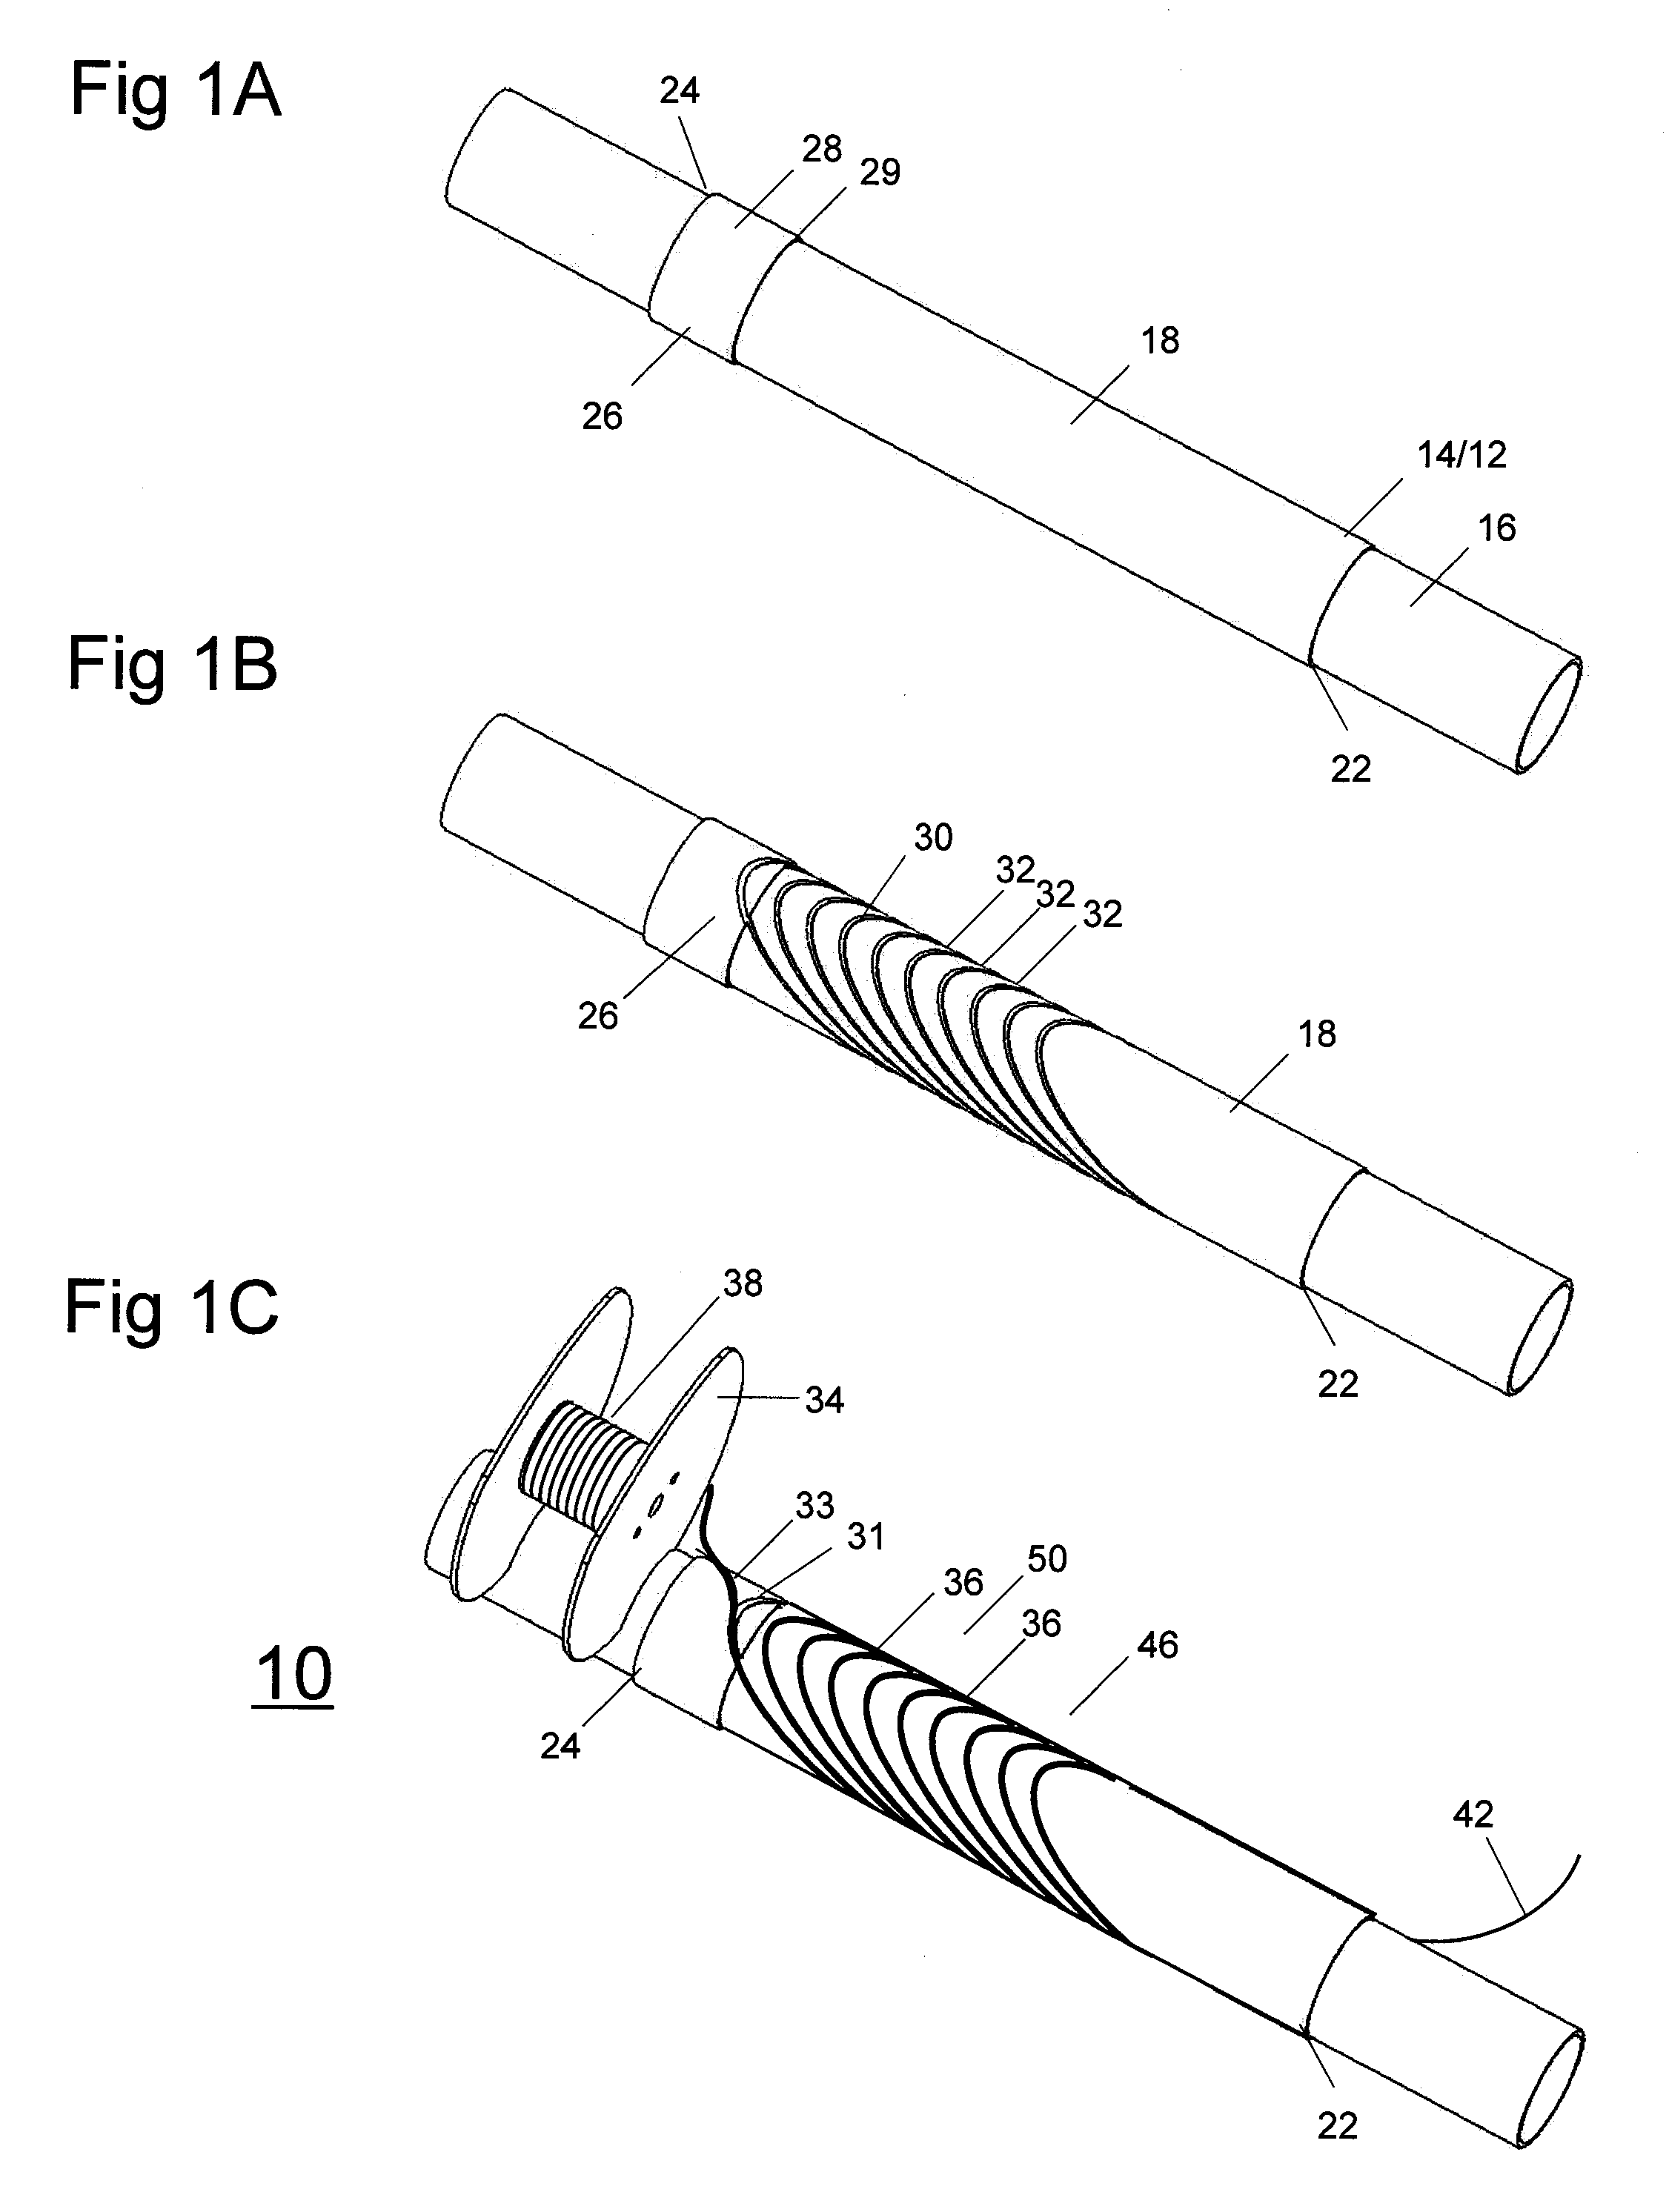 Structure For A Wiring Assembly And Method Suitable For Forming Multiple Coil Rows With Splice Free Conductor